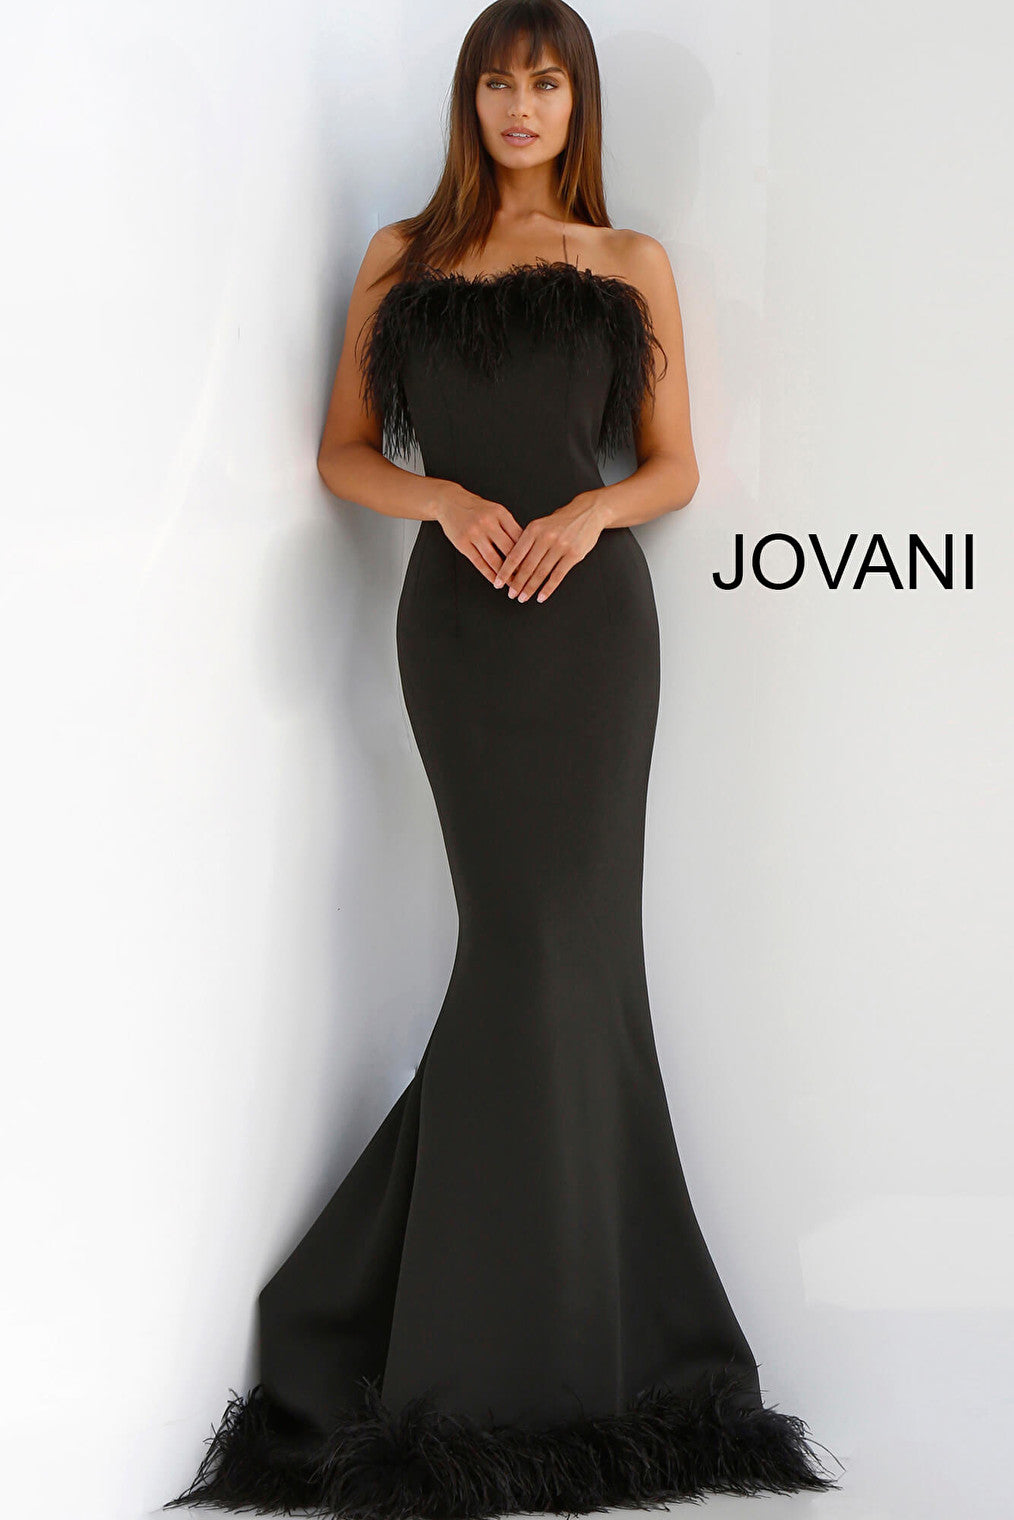 Jovani black feather strapless gown 63891